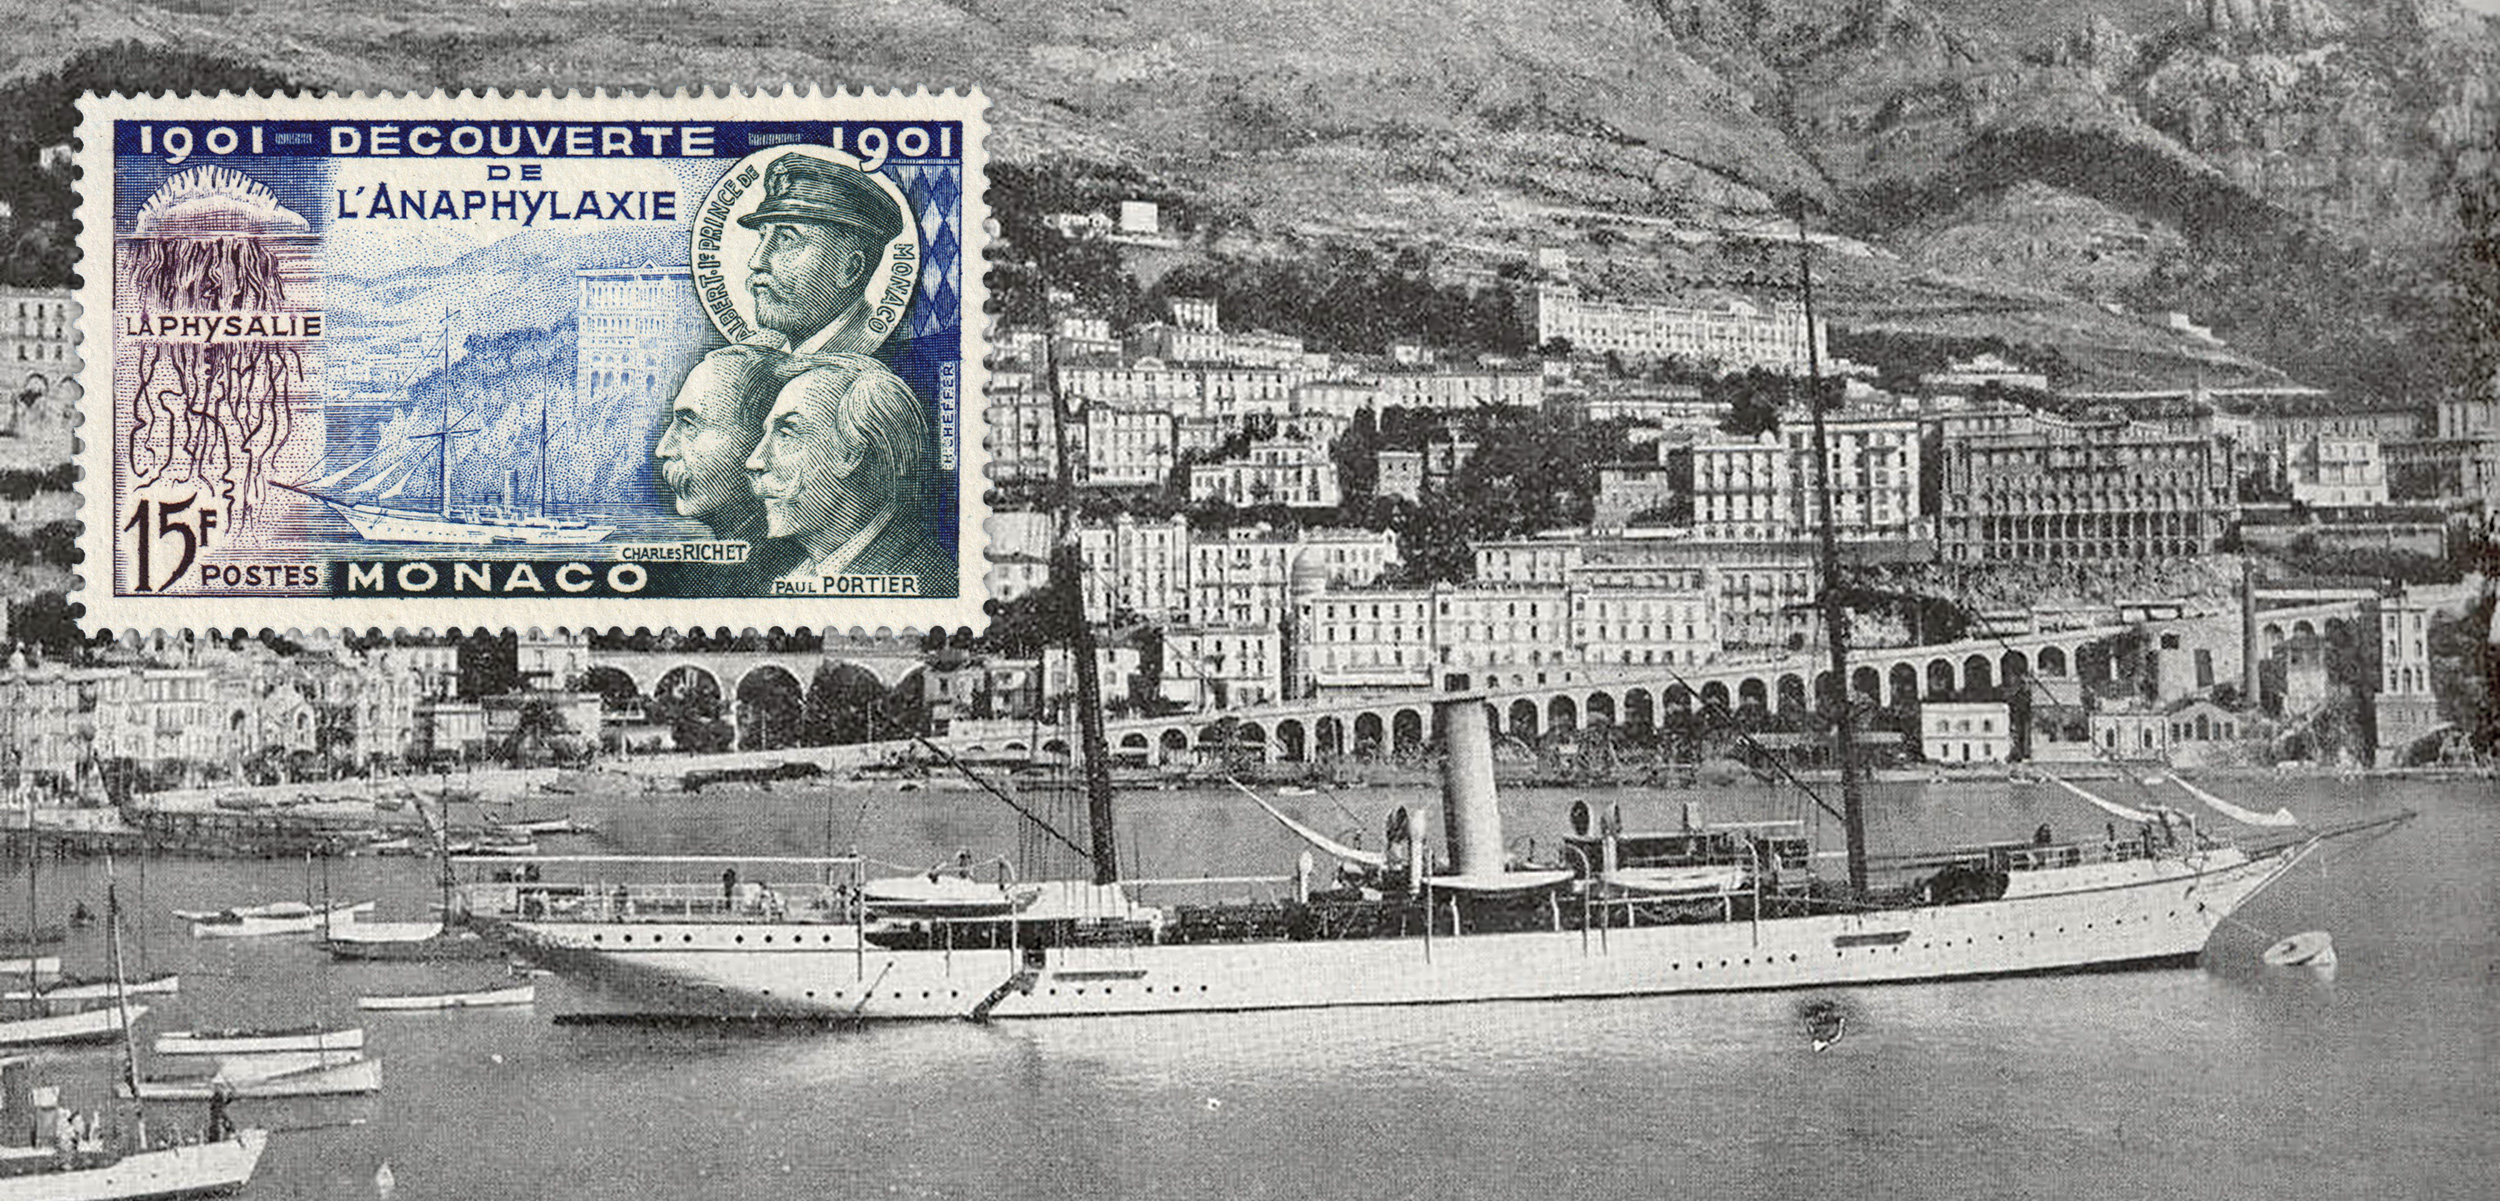 The discovery of anaphylaxis began aboard one of Prince Albert of Monaco’s yachts. Monaco commemorated the accomplishment with a series of stamps, but unfortunately depicted the wrong vessel. Background photo courtesy of Freshwater and Marine Image Bank/University of Washington